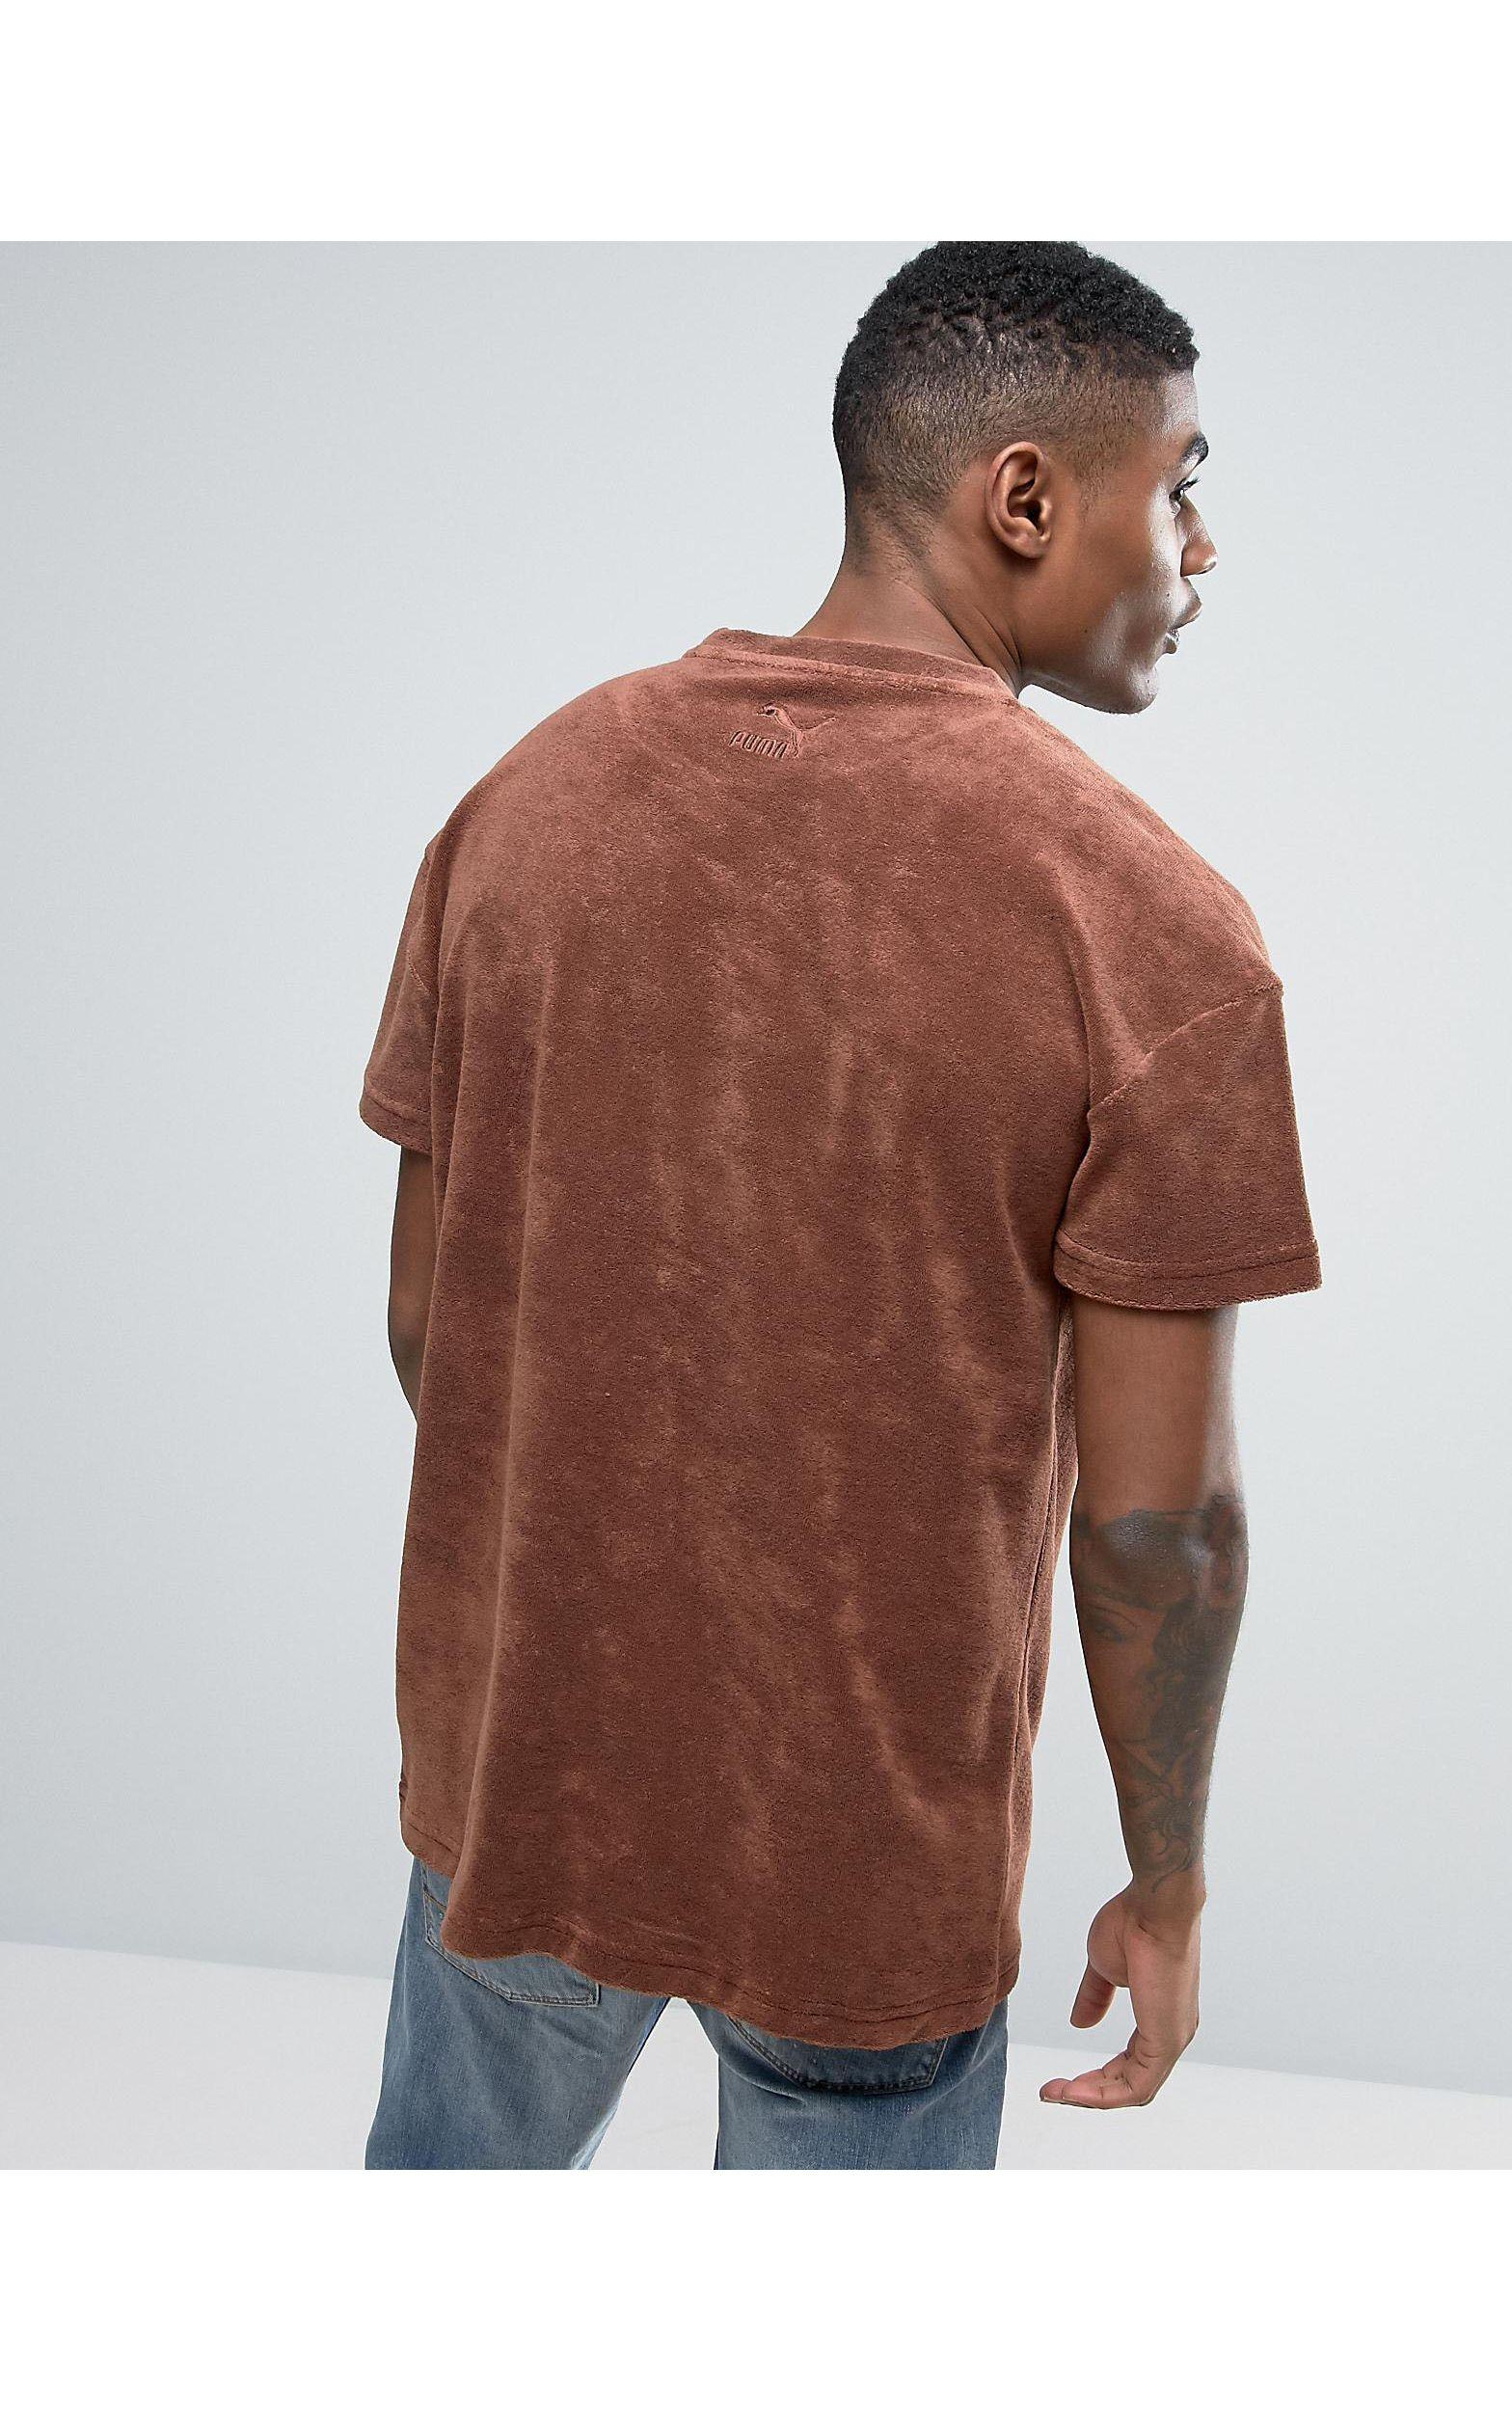 PUMA Cotton Towelling T-shirt In Brown Exclusive To Asos 57533302 for Men |  Lyst